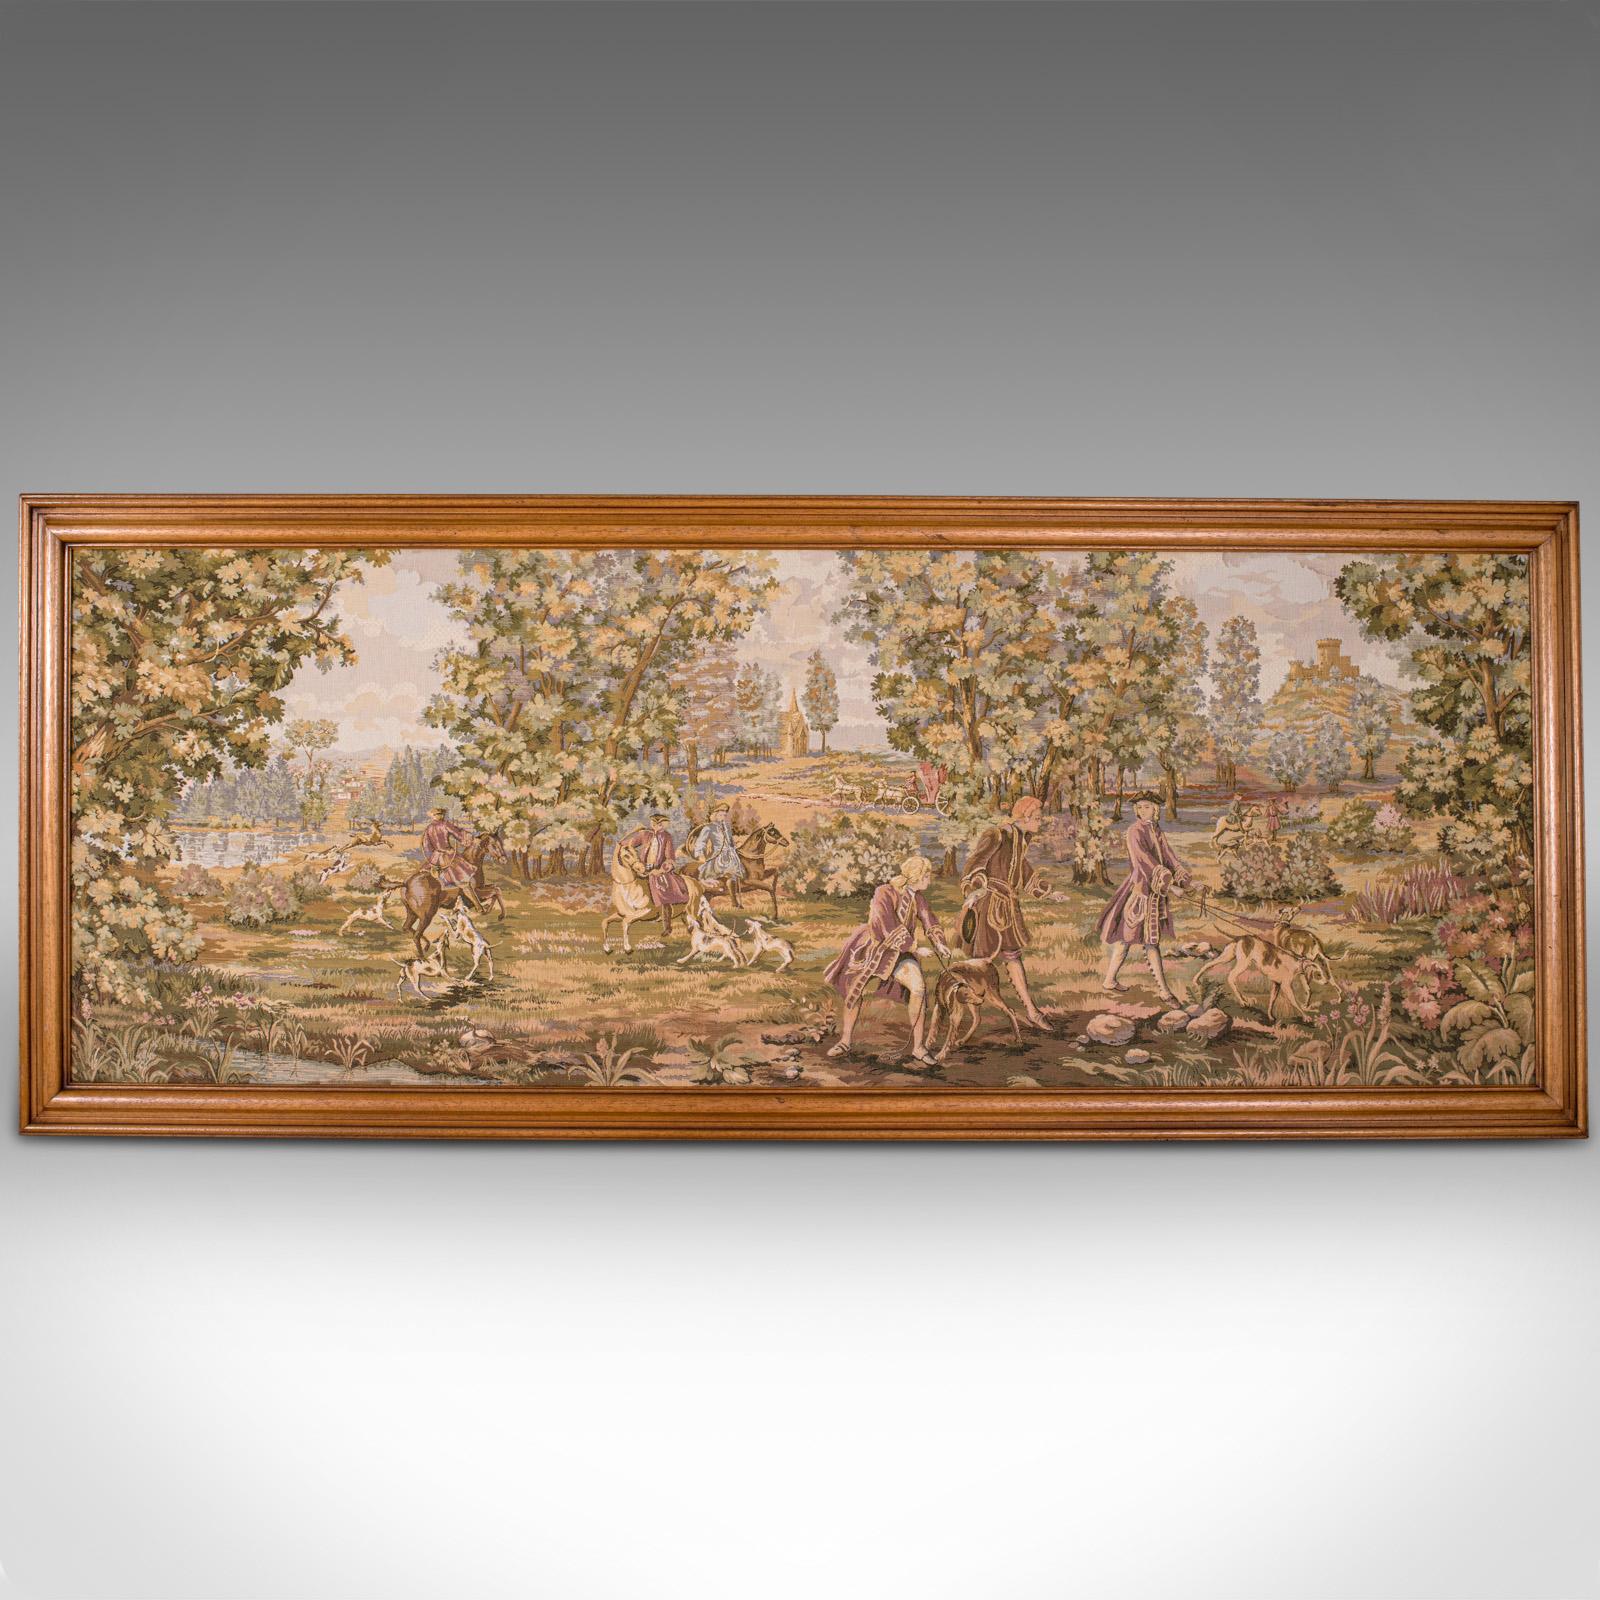 This is a large antique panoramic tapestry. A French, needlepoint decorative panel with mahogany frame, dating to the Edwardian period, circa 1910.

Fascinatingly wide with great detail and colour
Displays a desirable aged patina